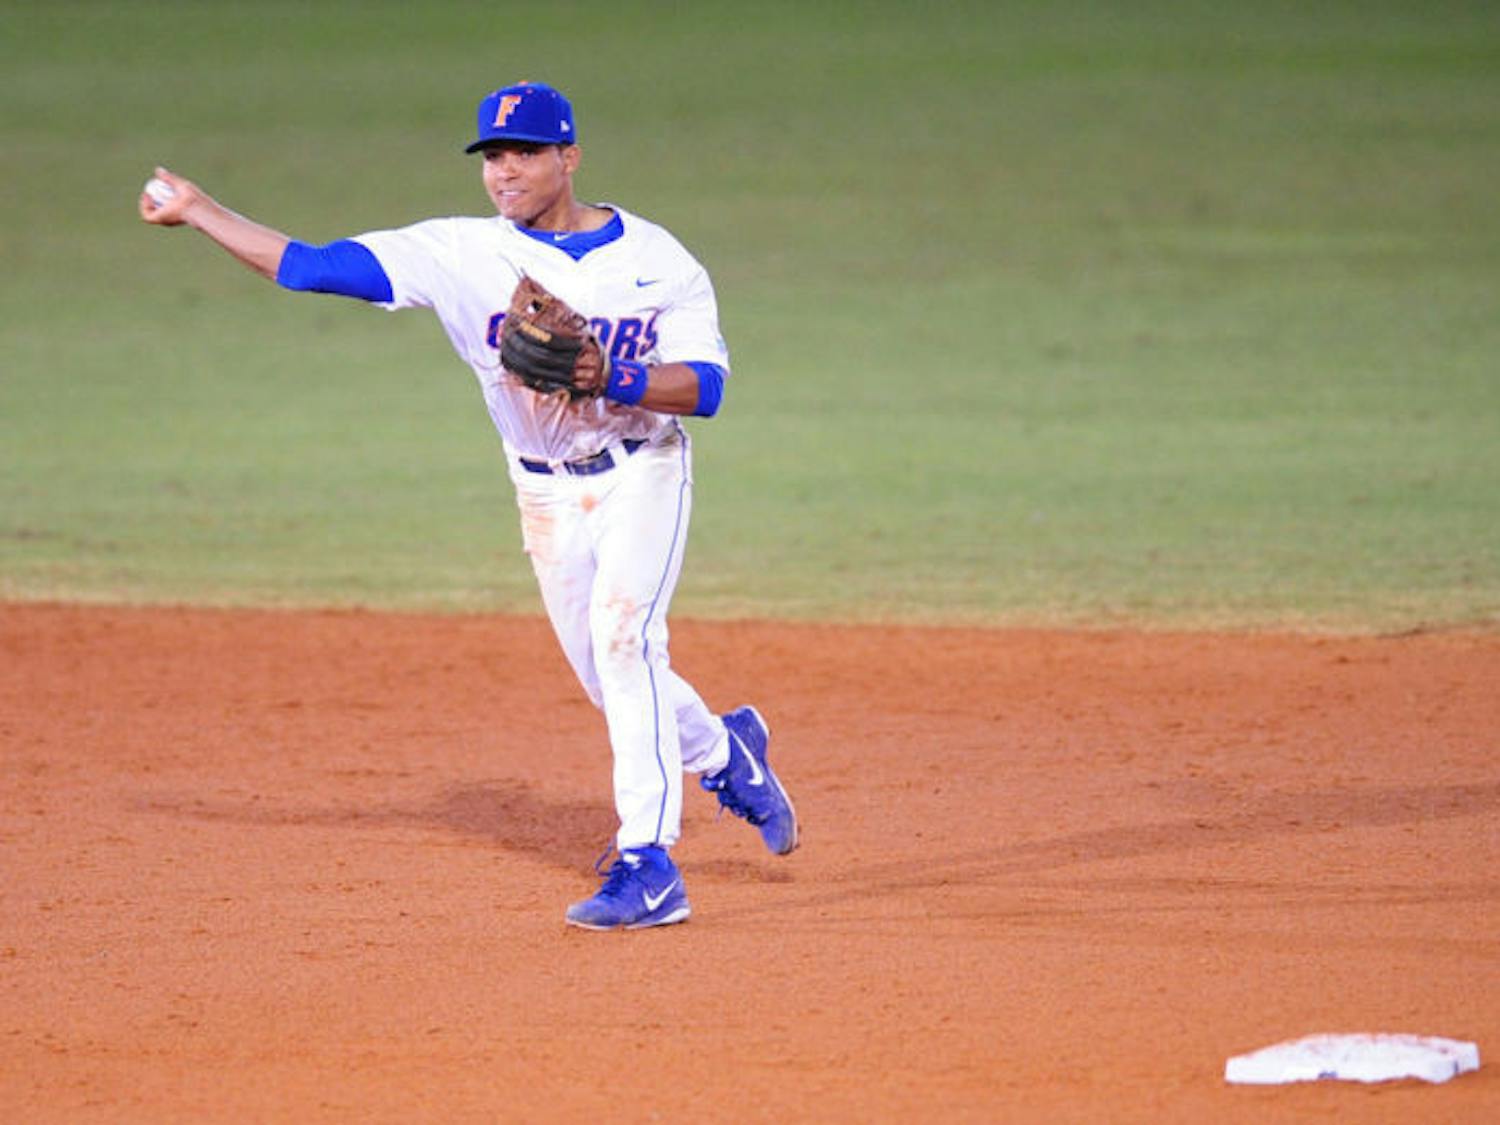 Richie Martin fields a ball during Florida’s 4-0 shutout over Maryland on Feb. 14 at McKethan Stadium.